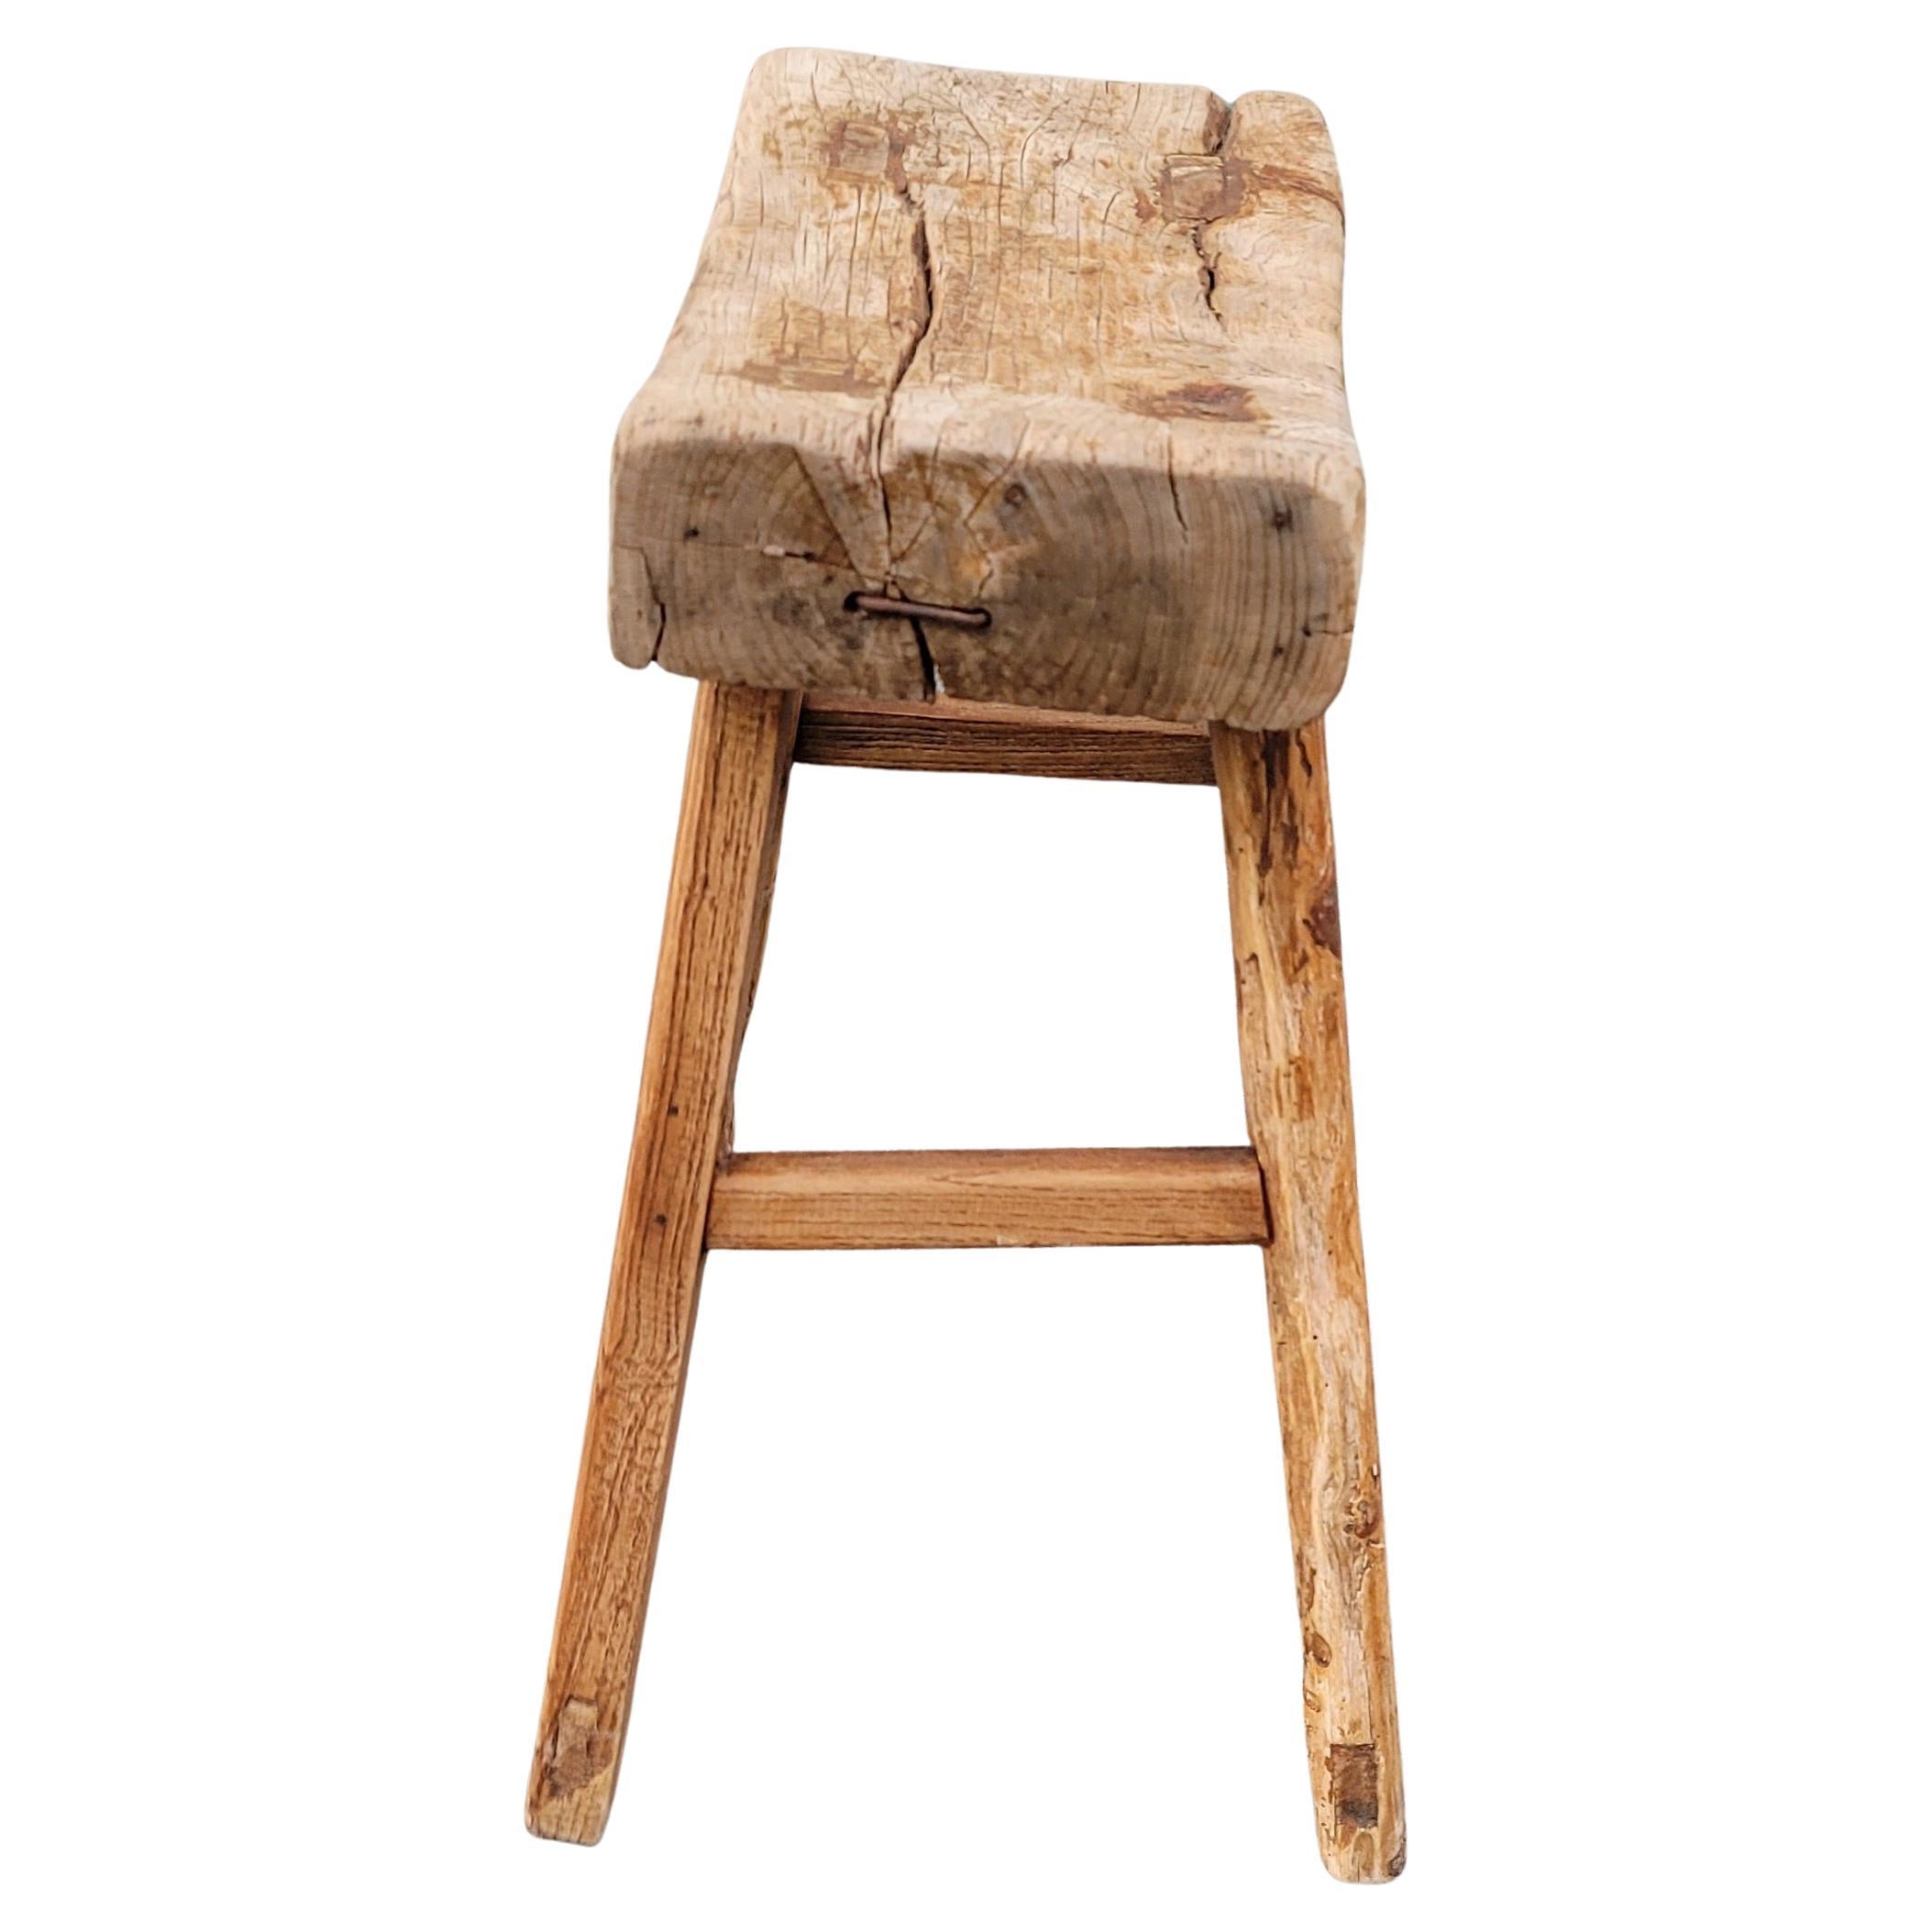 Chinese Export 19th Century Chinese Elm Rustic Farmhouse Primitive Brutalist Stool For Sale